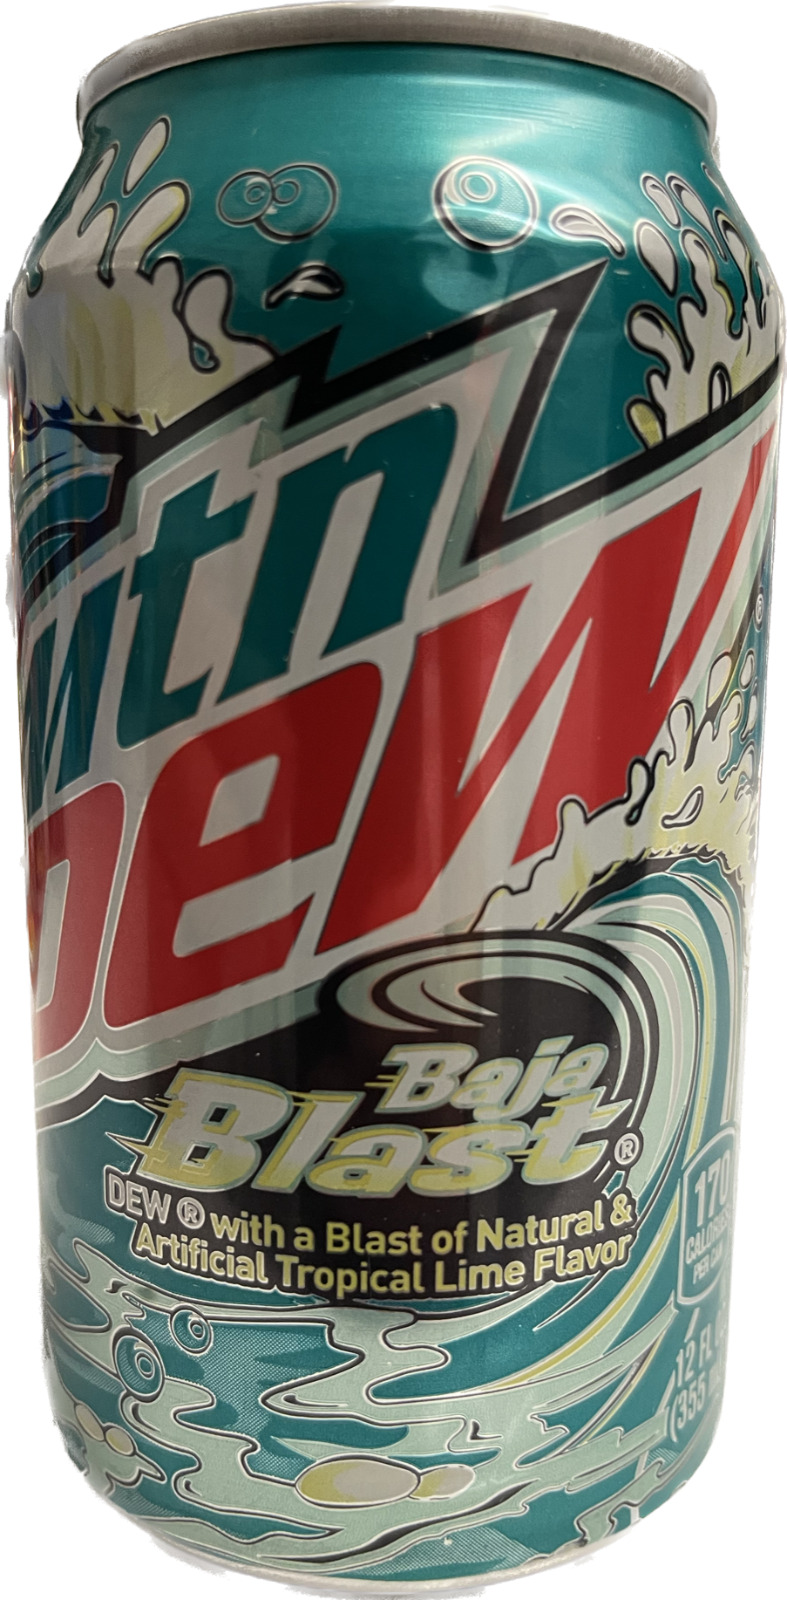 BUILD YOUR OWN MTN DEW 12 FLOZ SODA CAN PACK PICK & CHOOSE 14 DIFFERENT FLAVORS